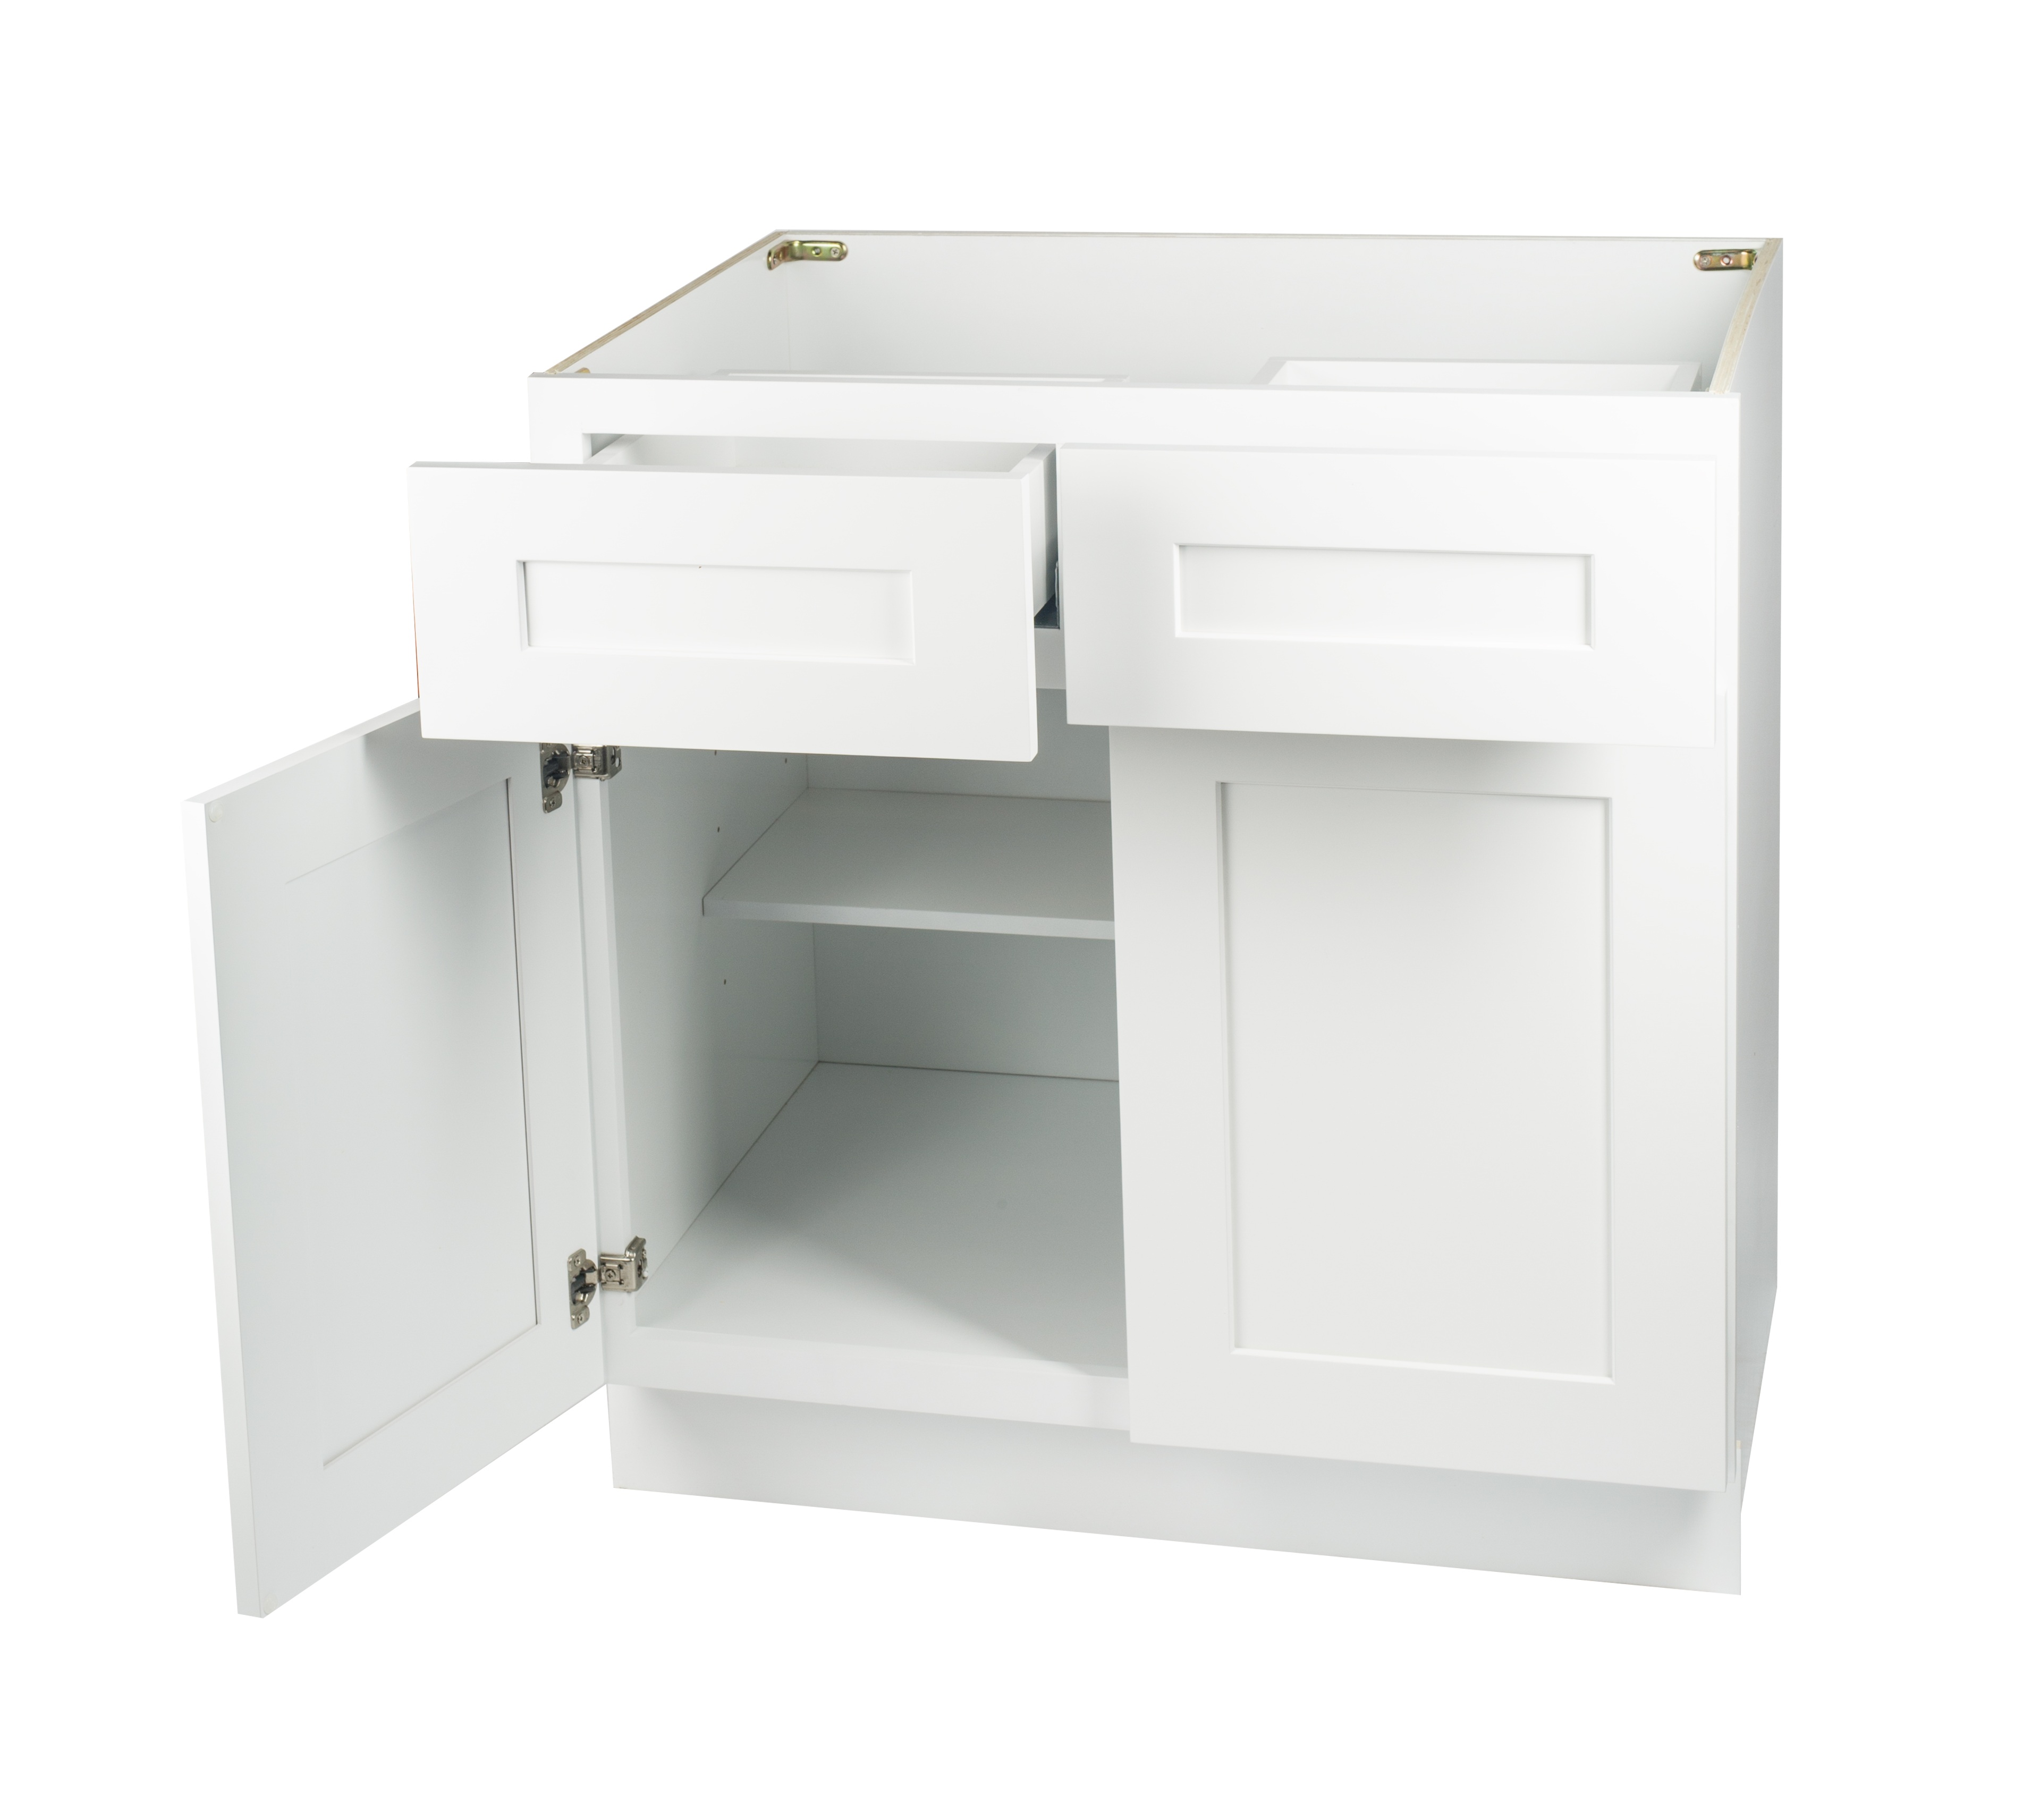 Ready to Assemble 39Wx34.5Hx24D in. Shaker Base Cabinet with 2 Door and 2 Drawer in White